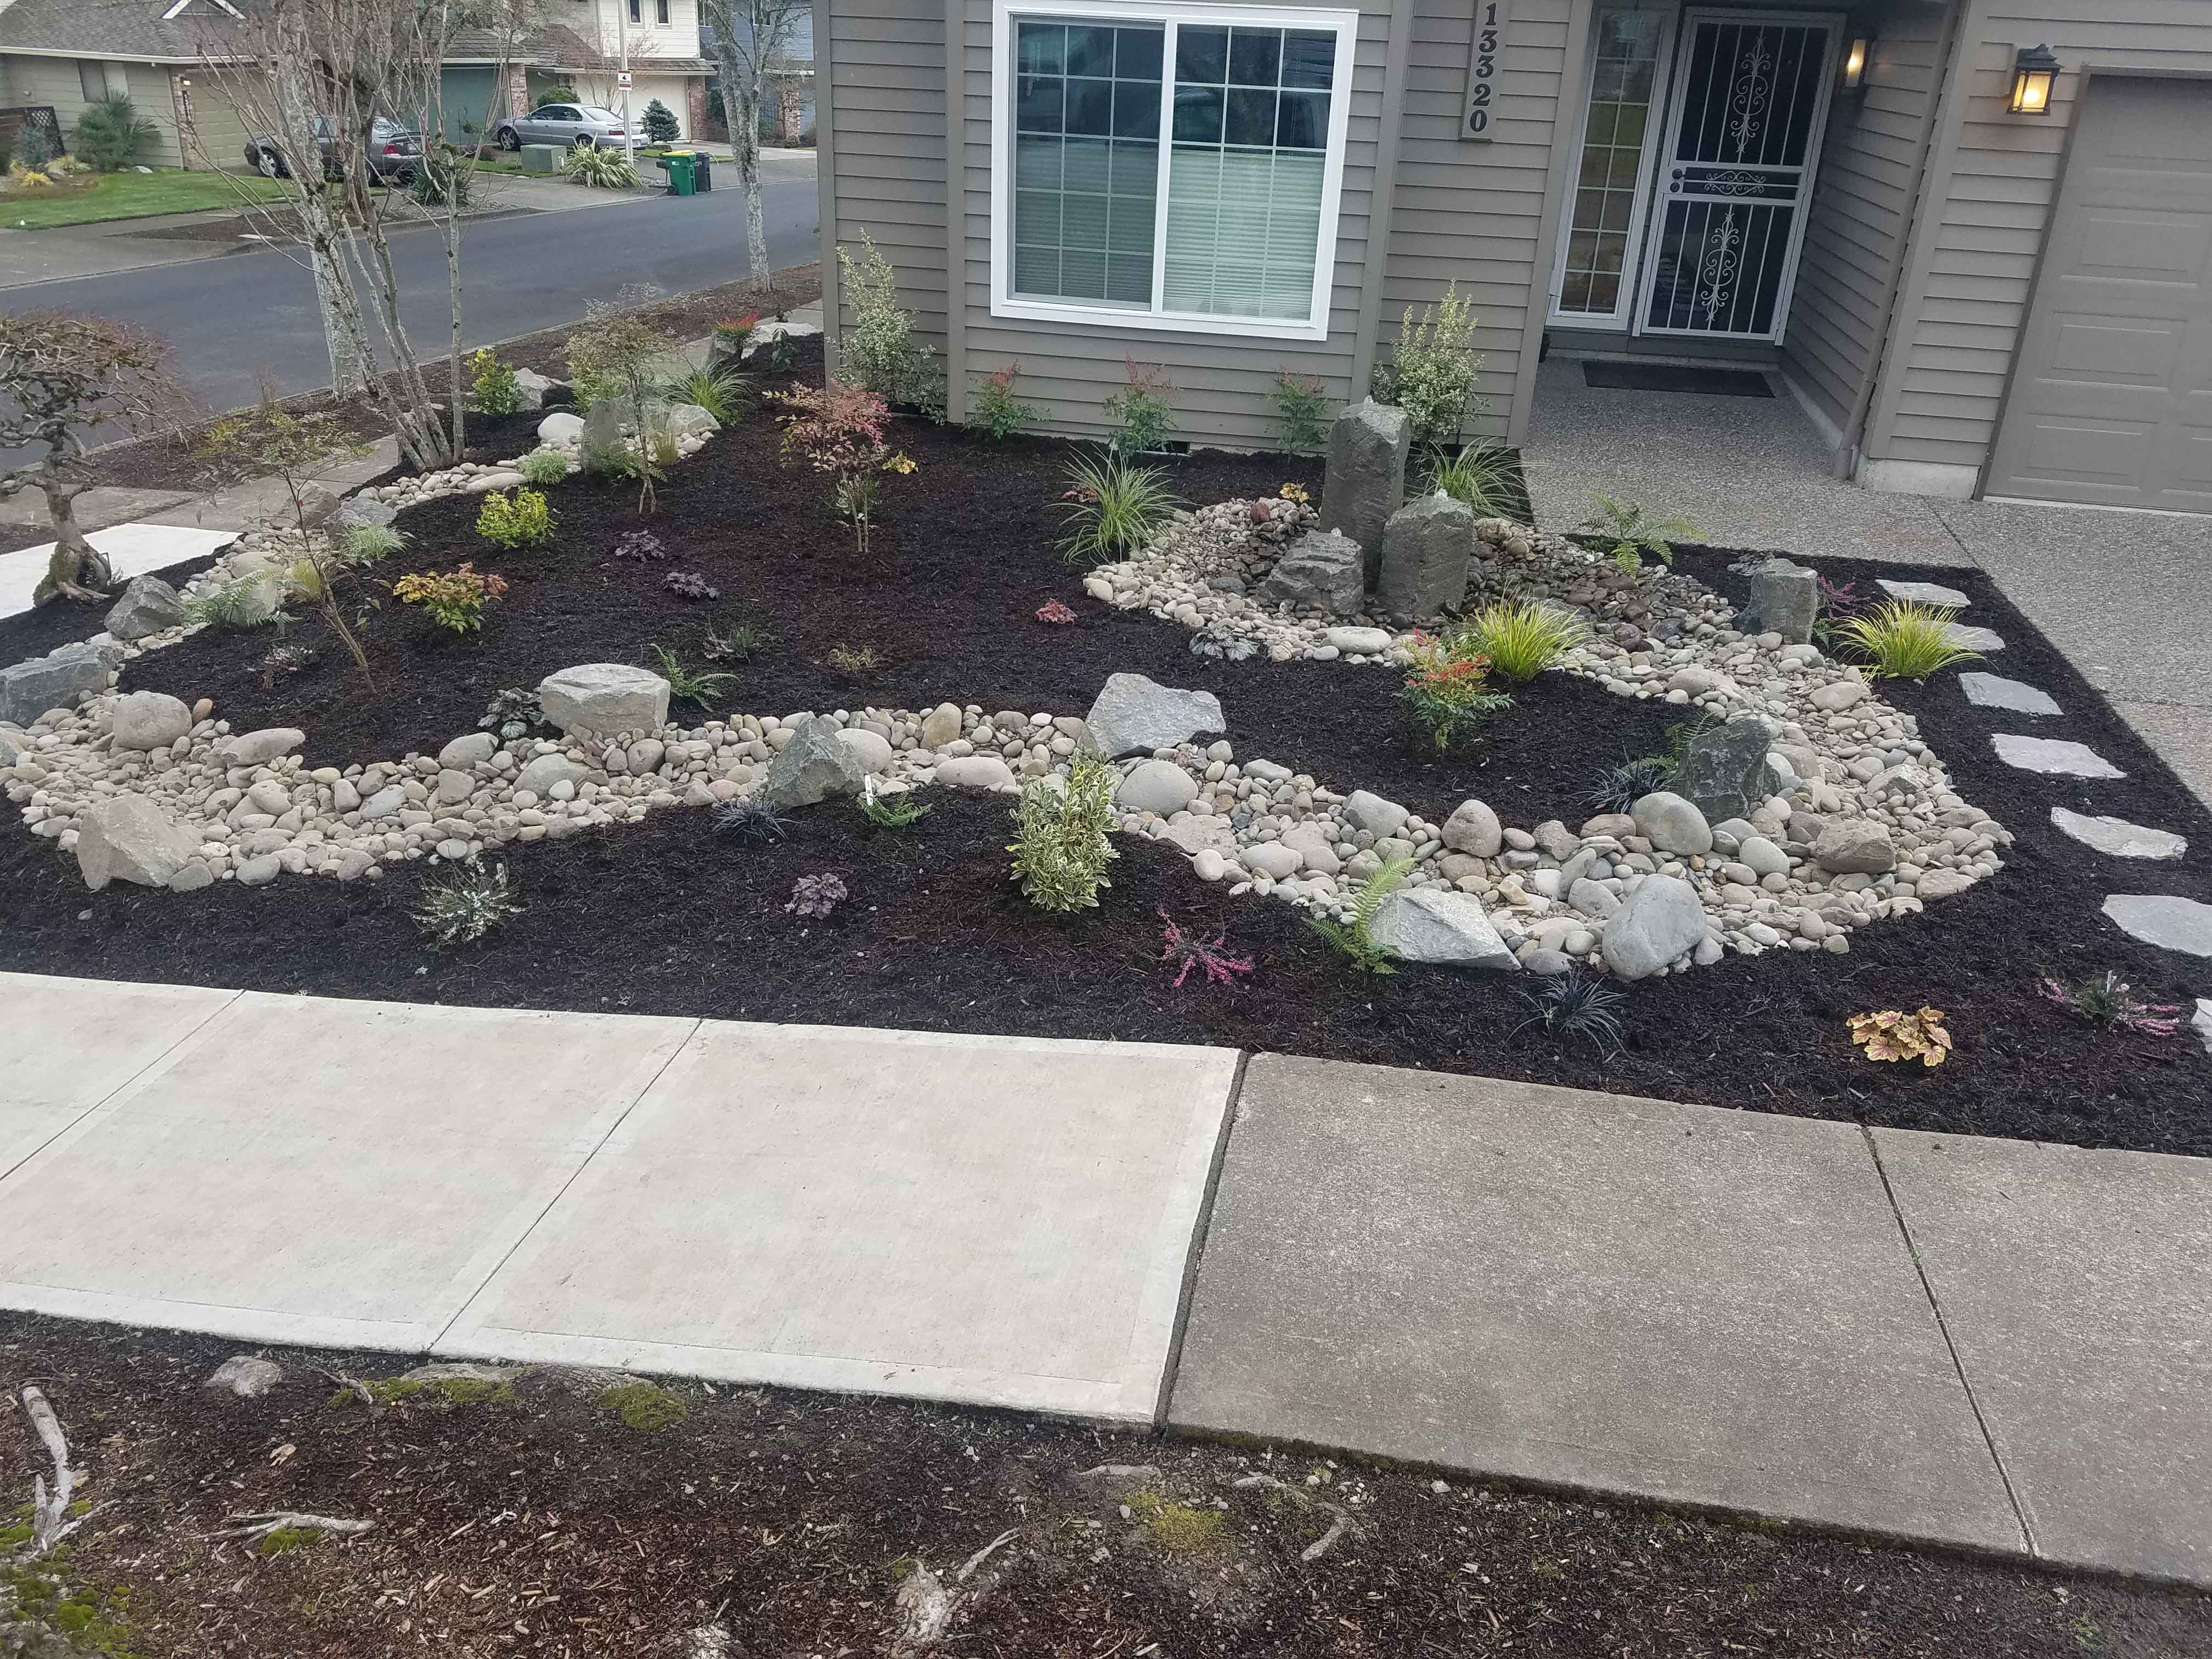 Fully remodeled backyard landscape with cement walkways, metal railings, dirt beds, gravel beds and newly planted trees with ring retaining walls